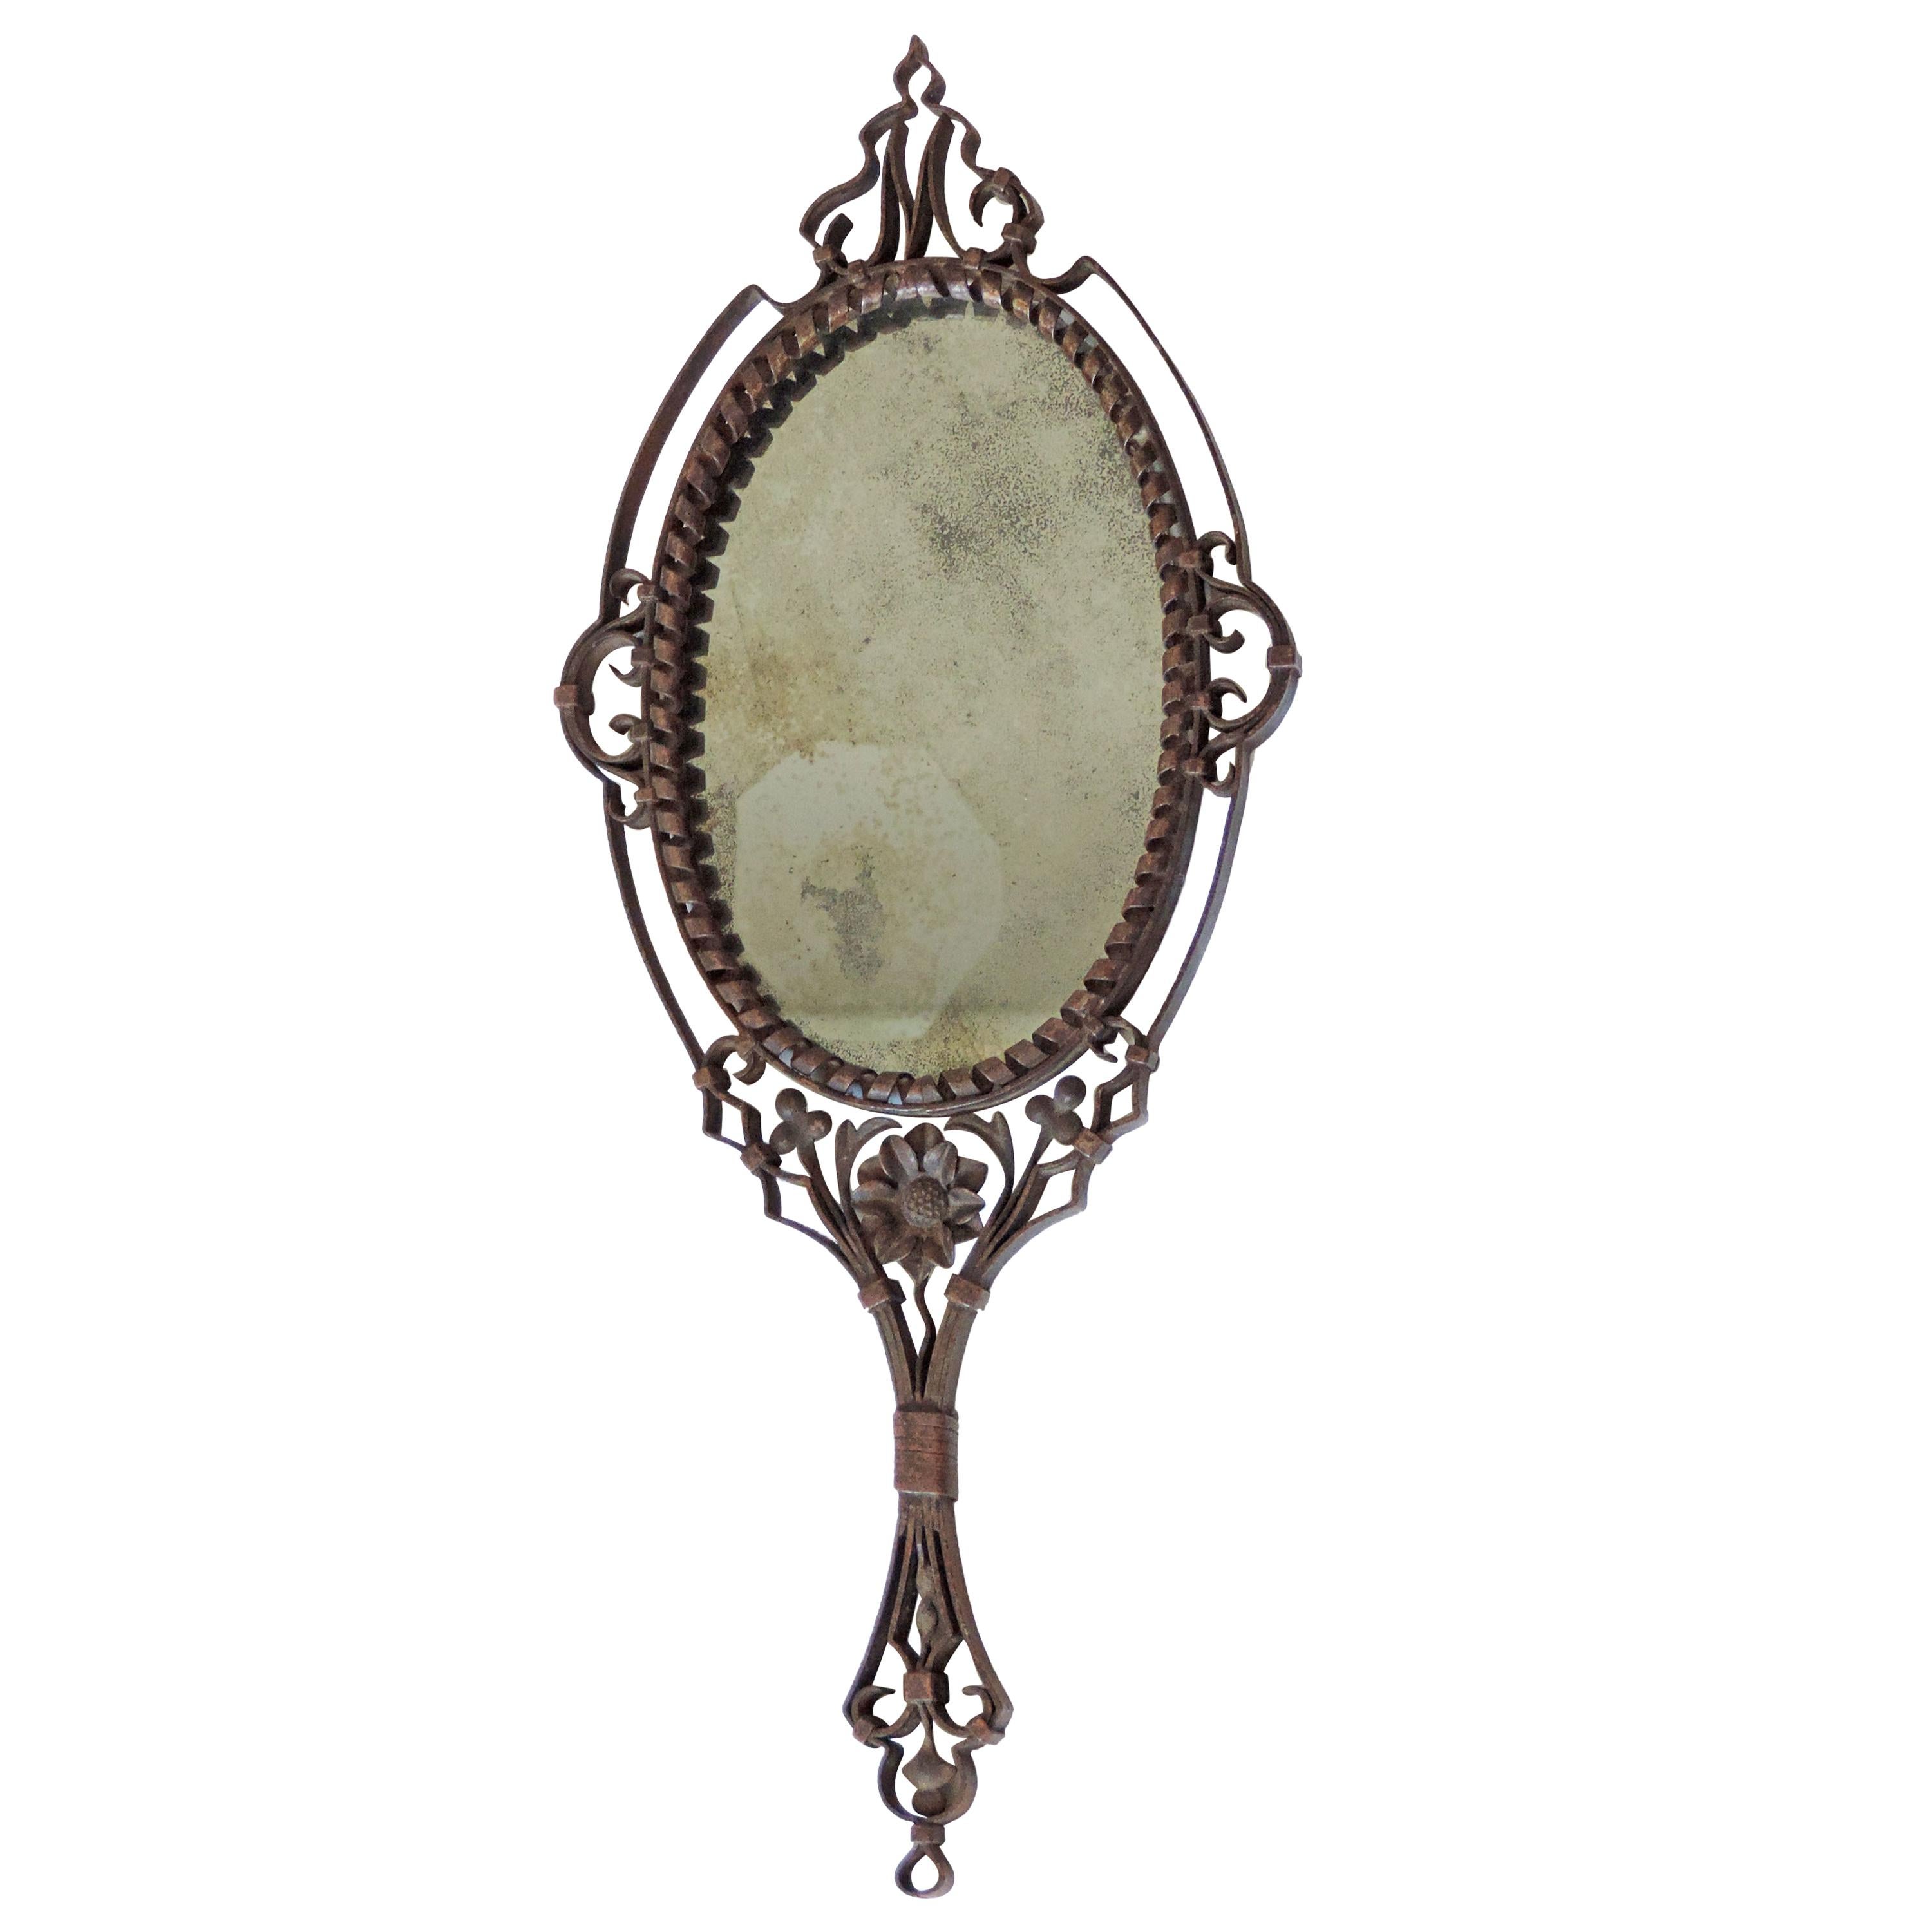 Intricate Italian Iron Hand Mirror with M Initial, 1920s